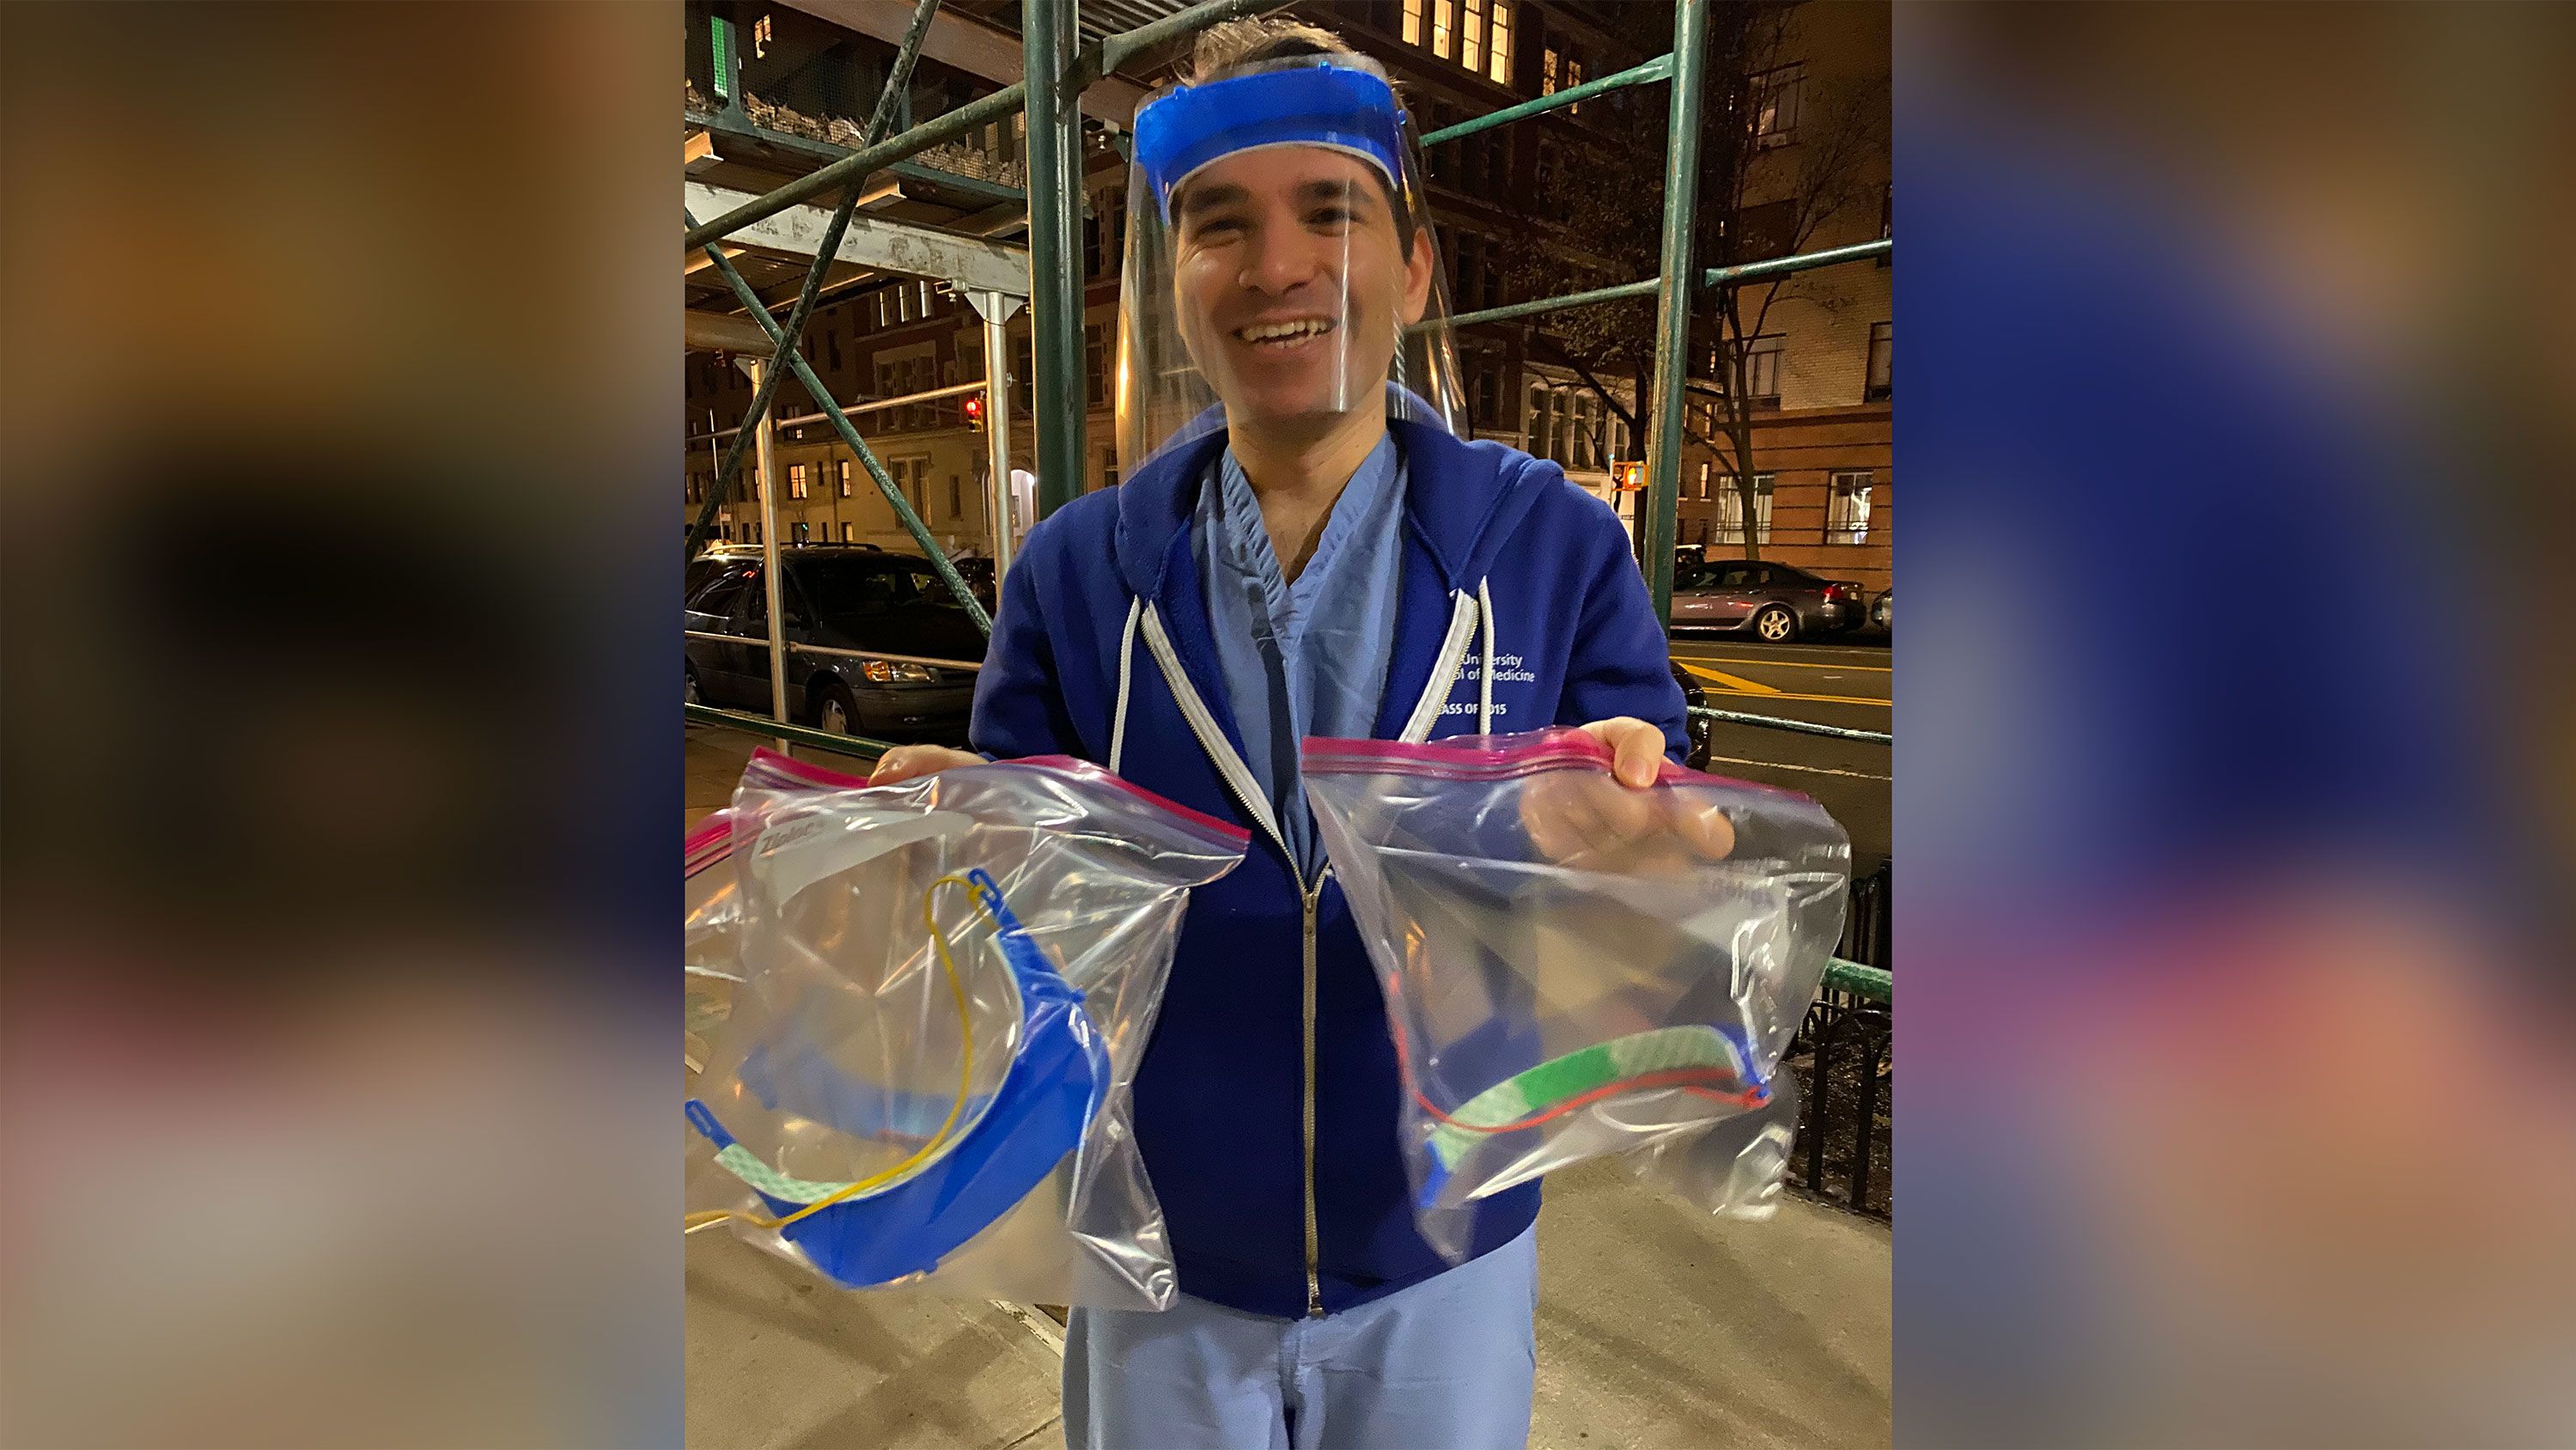 Dr. Pierre Elias holds the first face shields donated to his colleagues. 